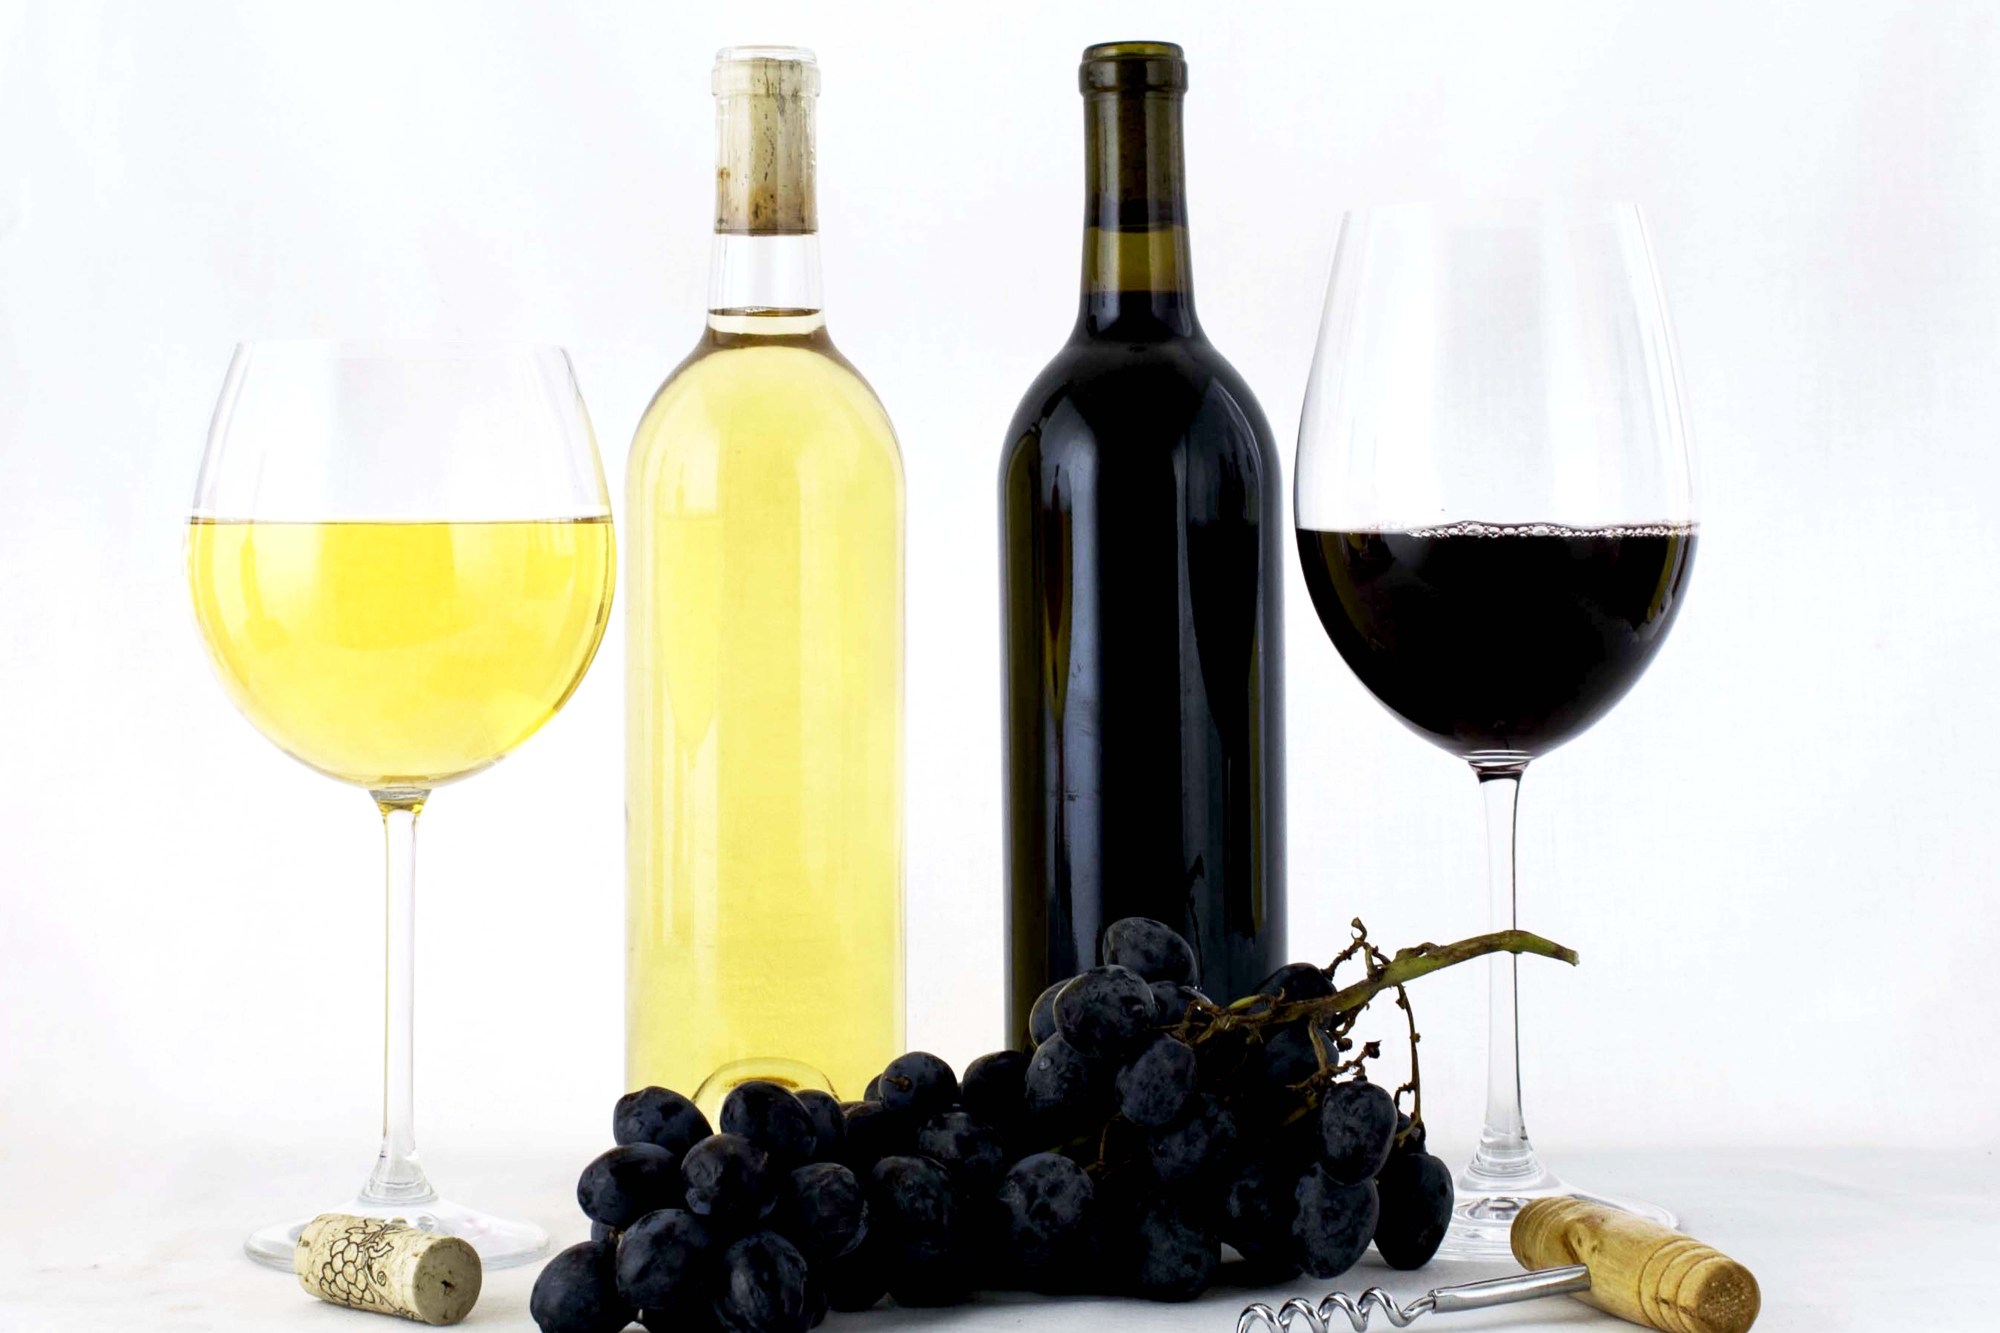 Custom Wine Making and Lab Services, from Grape to Glass